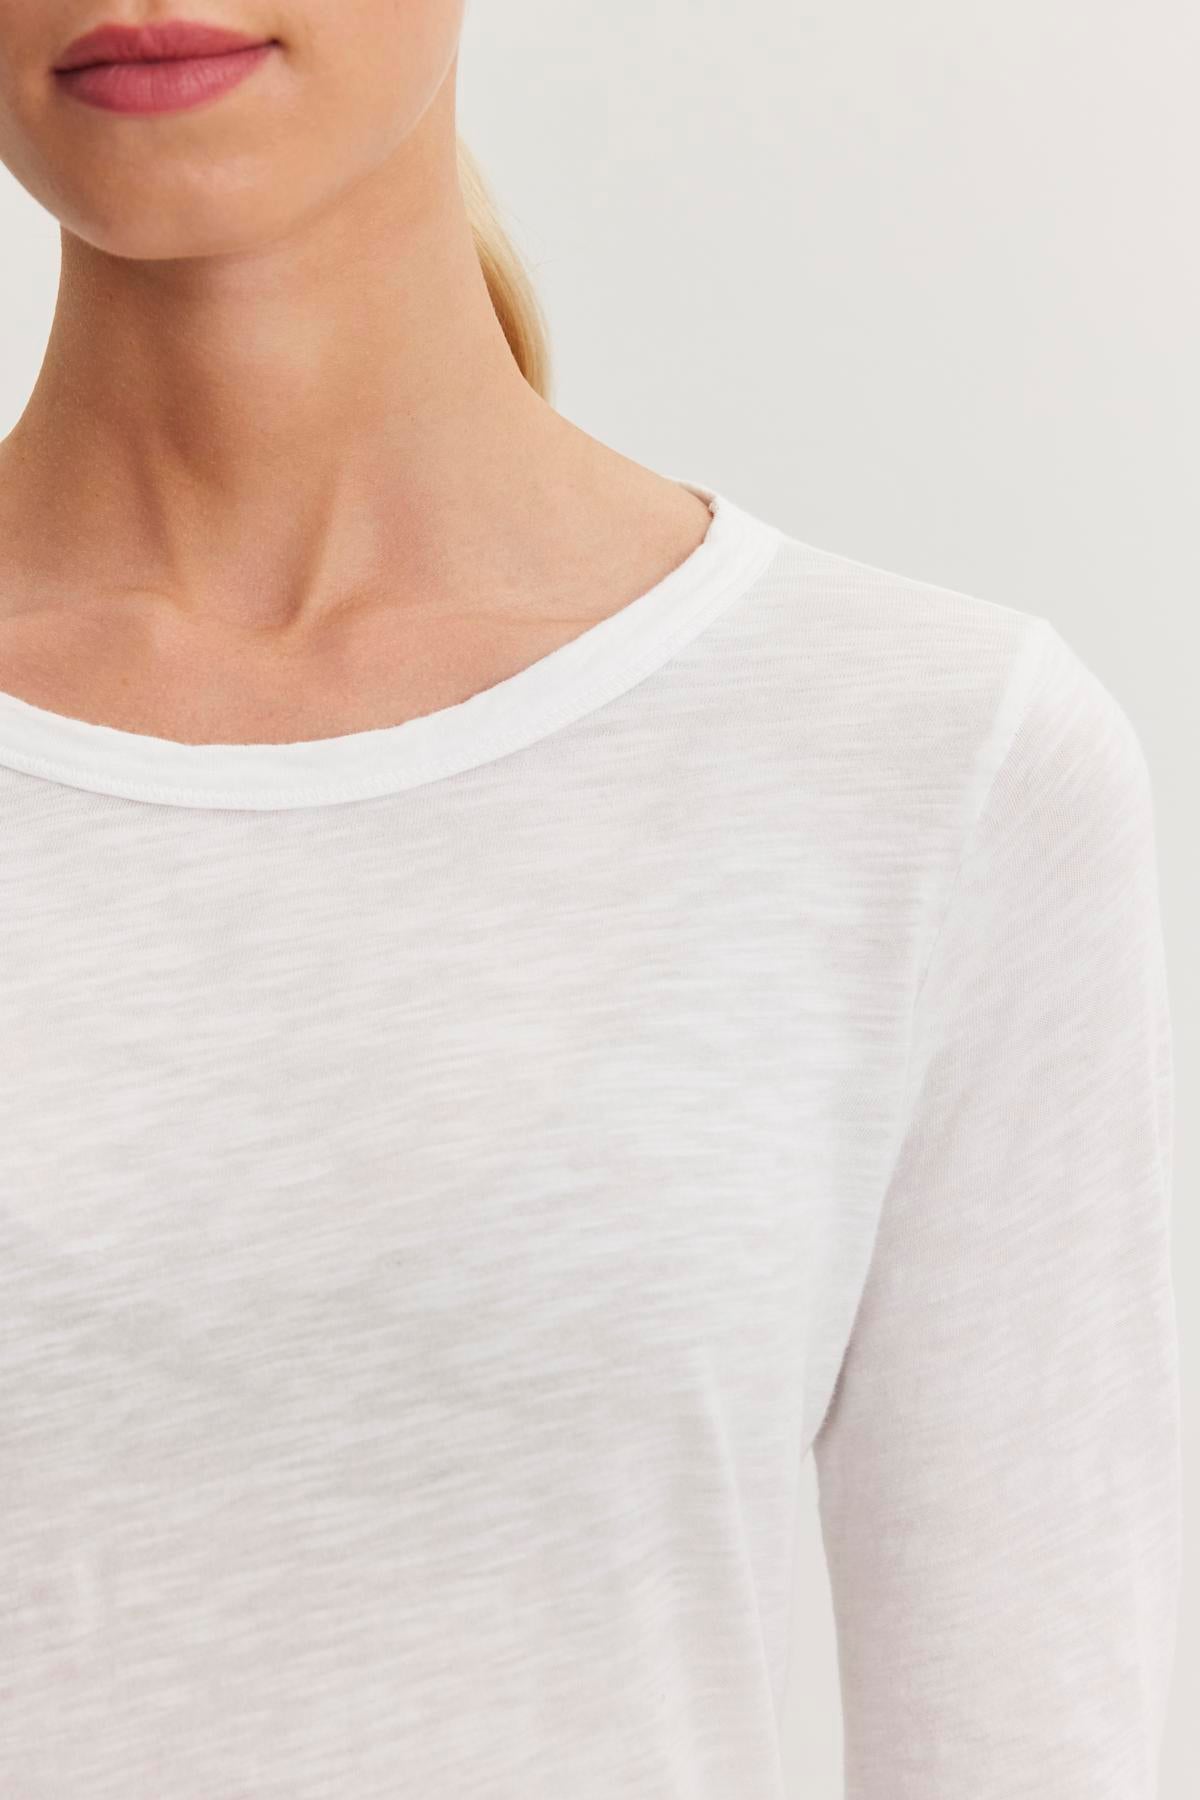   Close-up of the upper body of a person wearing a white, long-sleeve shirt made from textured cotton slub with a classic crew neckline, against a plain background. The shirt is the LIZZIE TEE by Velvet by Graham & Spencer. 